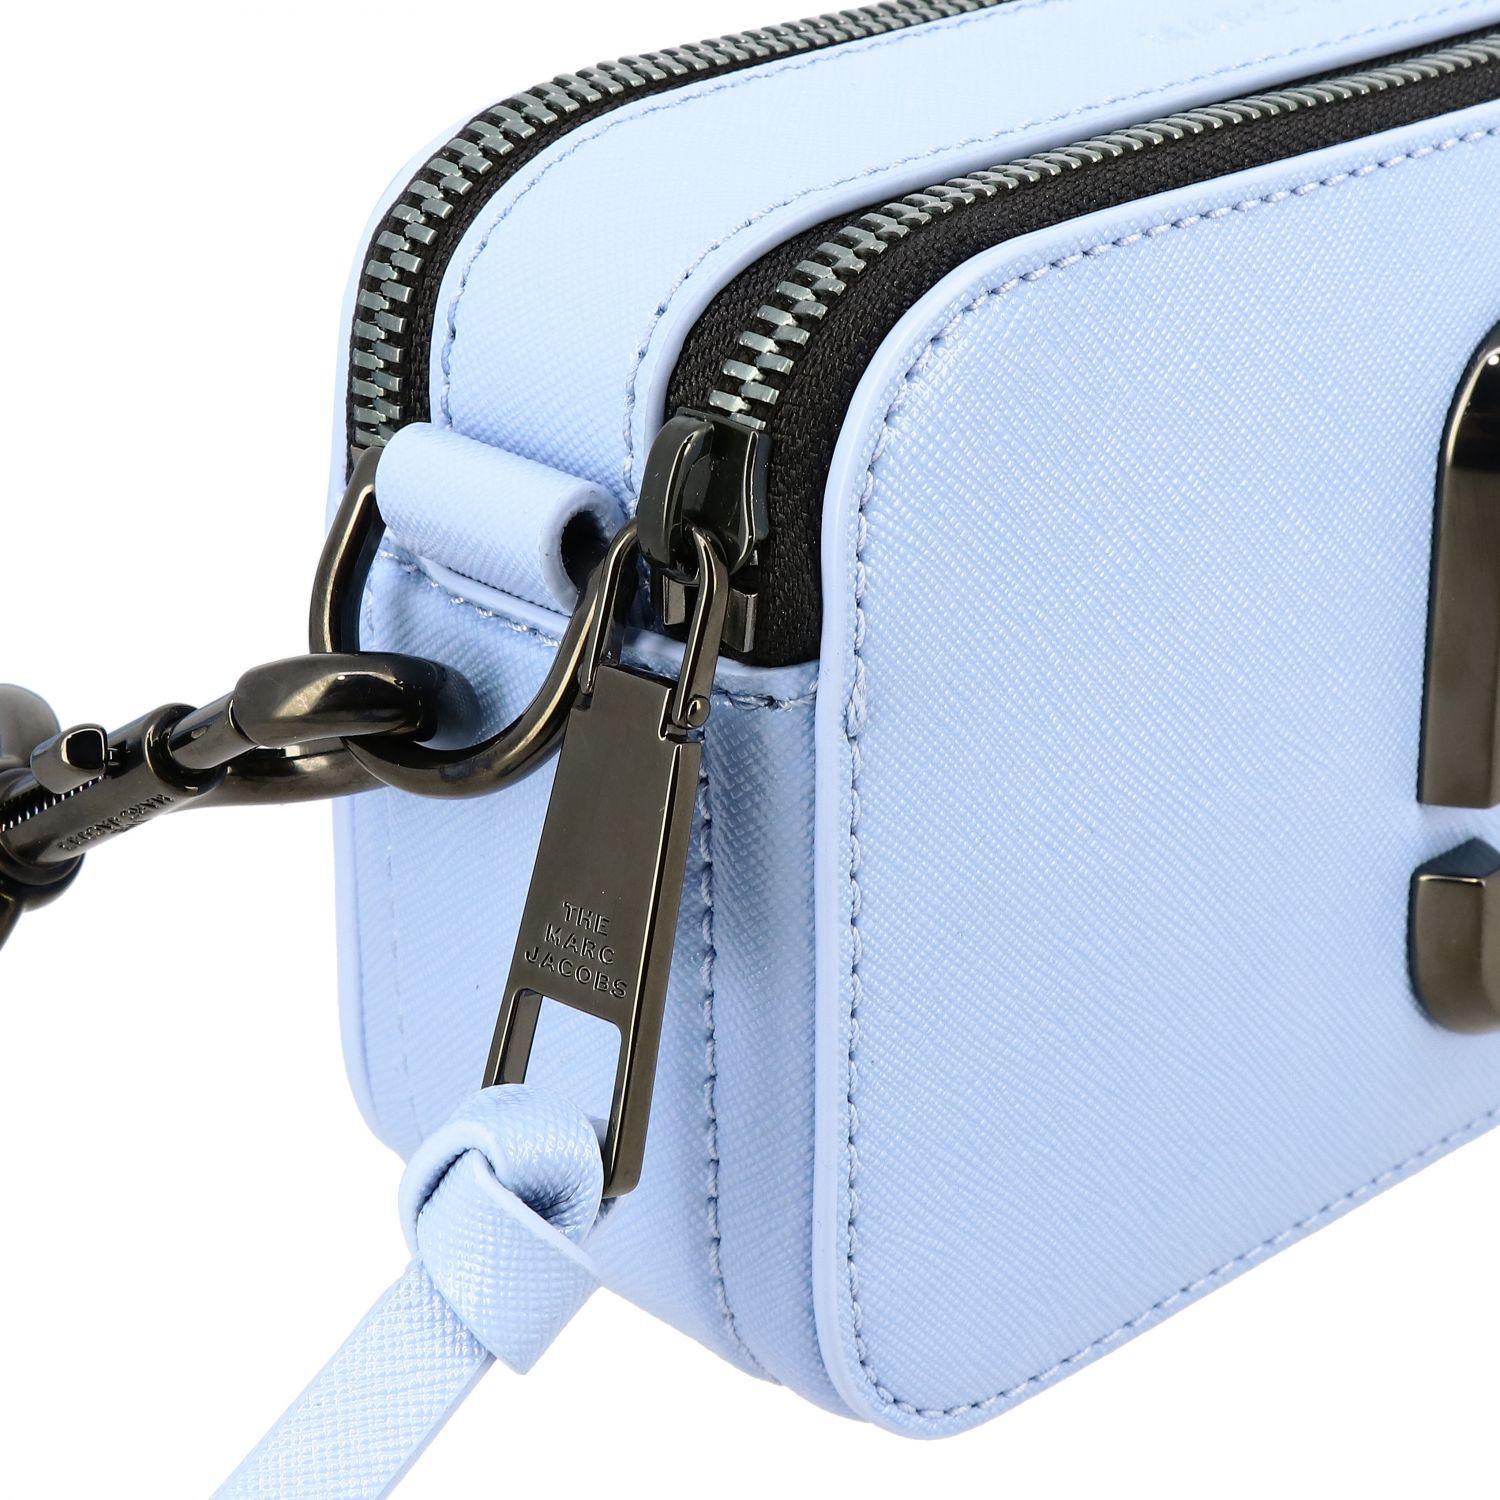 Snapshot leather crossbody bag Marc Jacobs Blue in Leather - 28034049